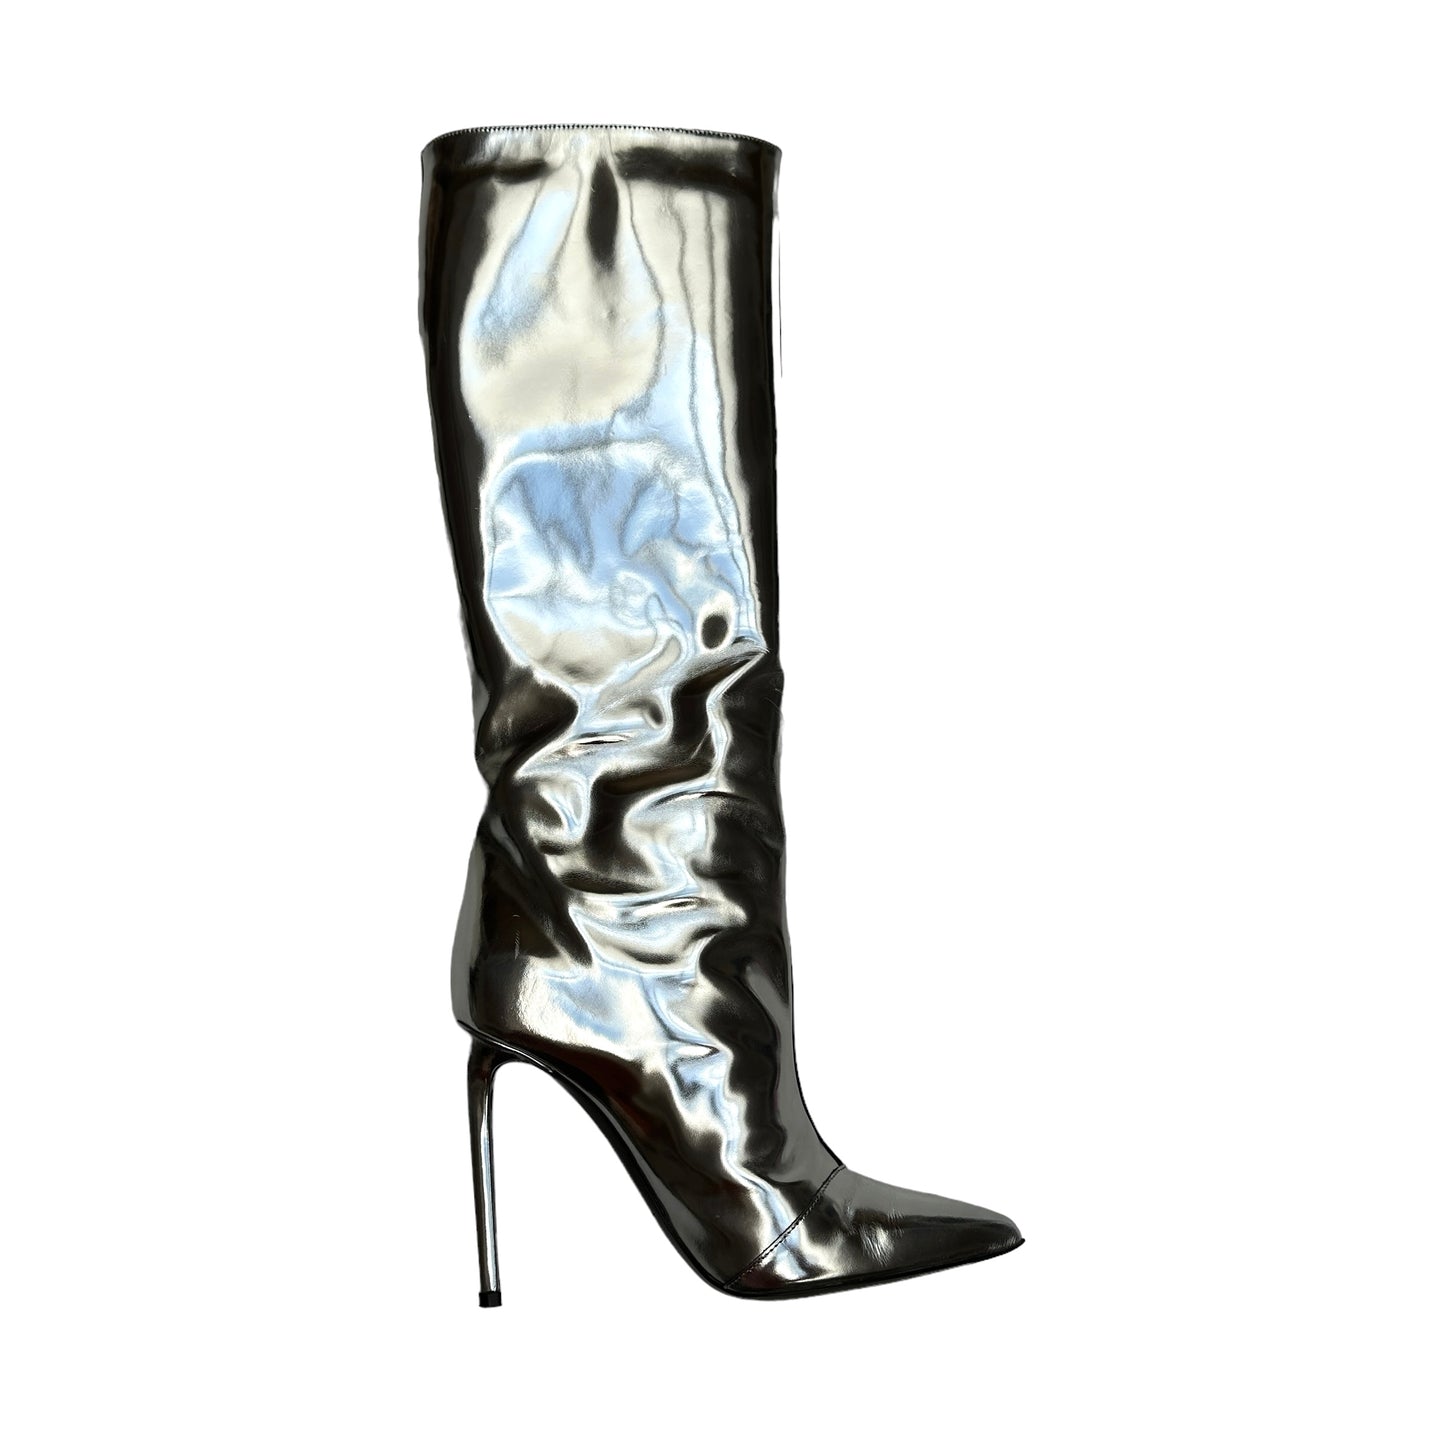 Silver Leather Tall Heeled Boots - 7